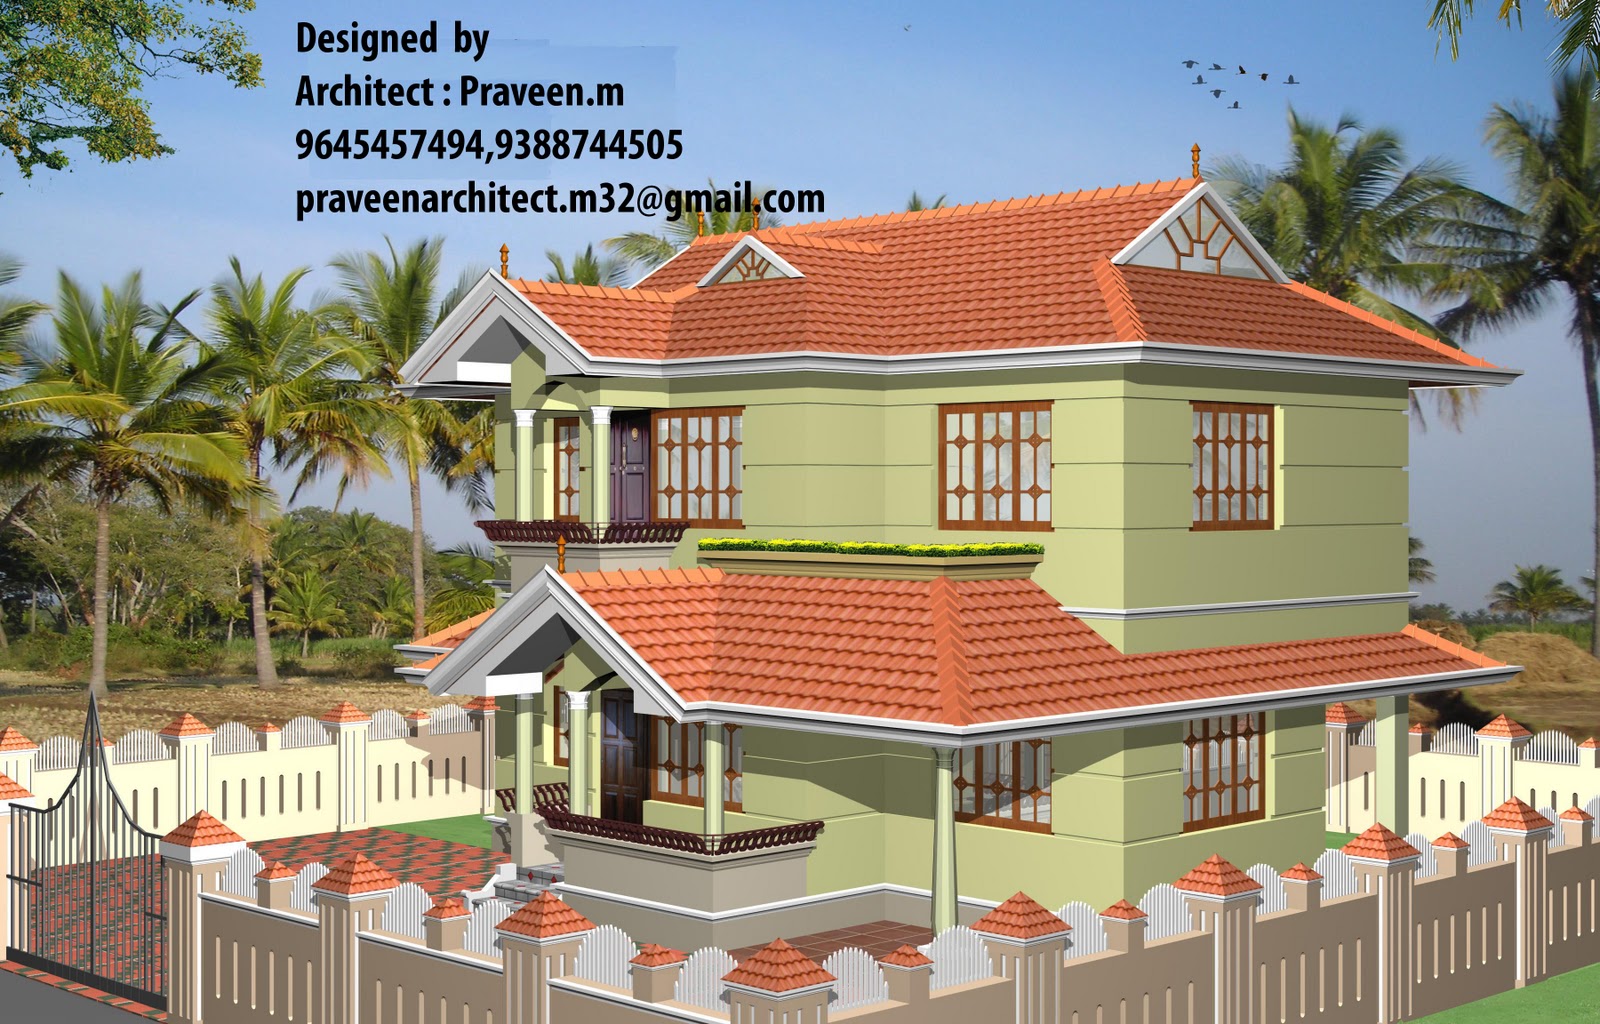 Do It your self home design download at sharedweb page Do It your self home design download at sharecom